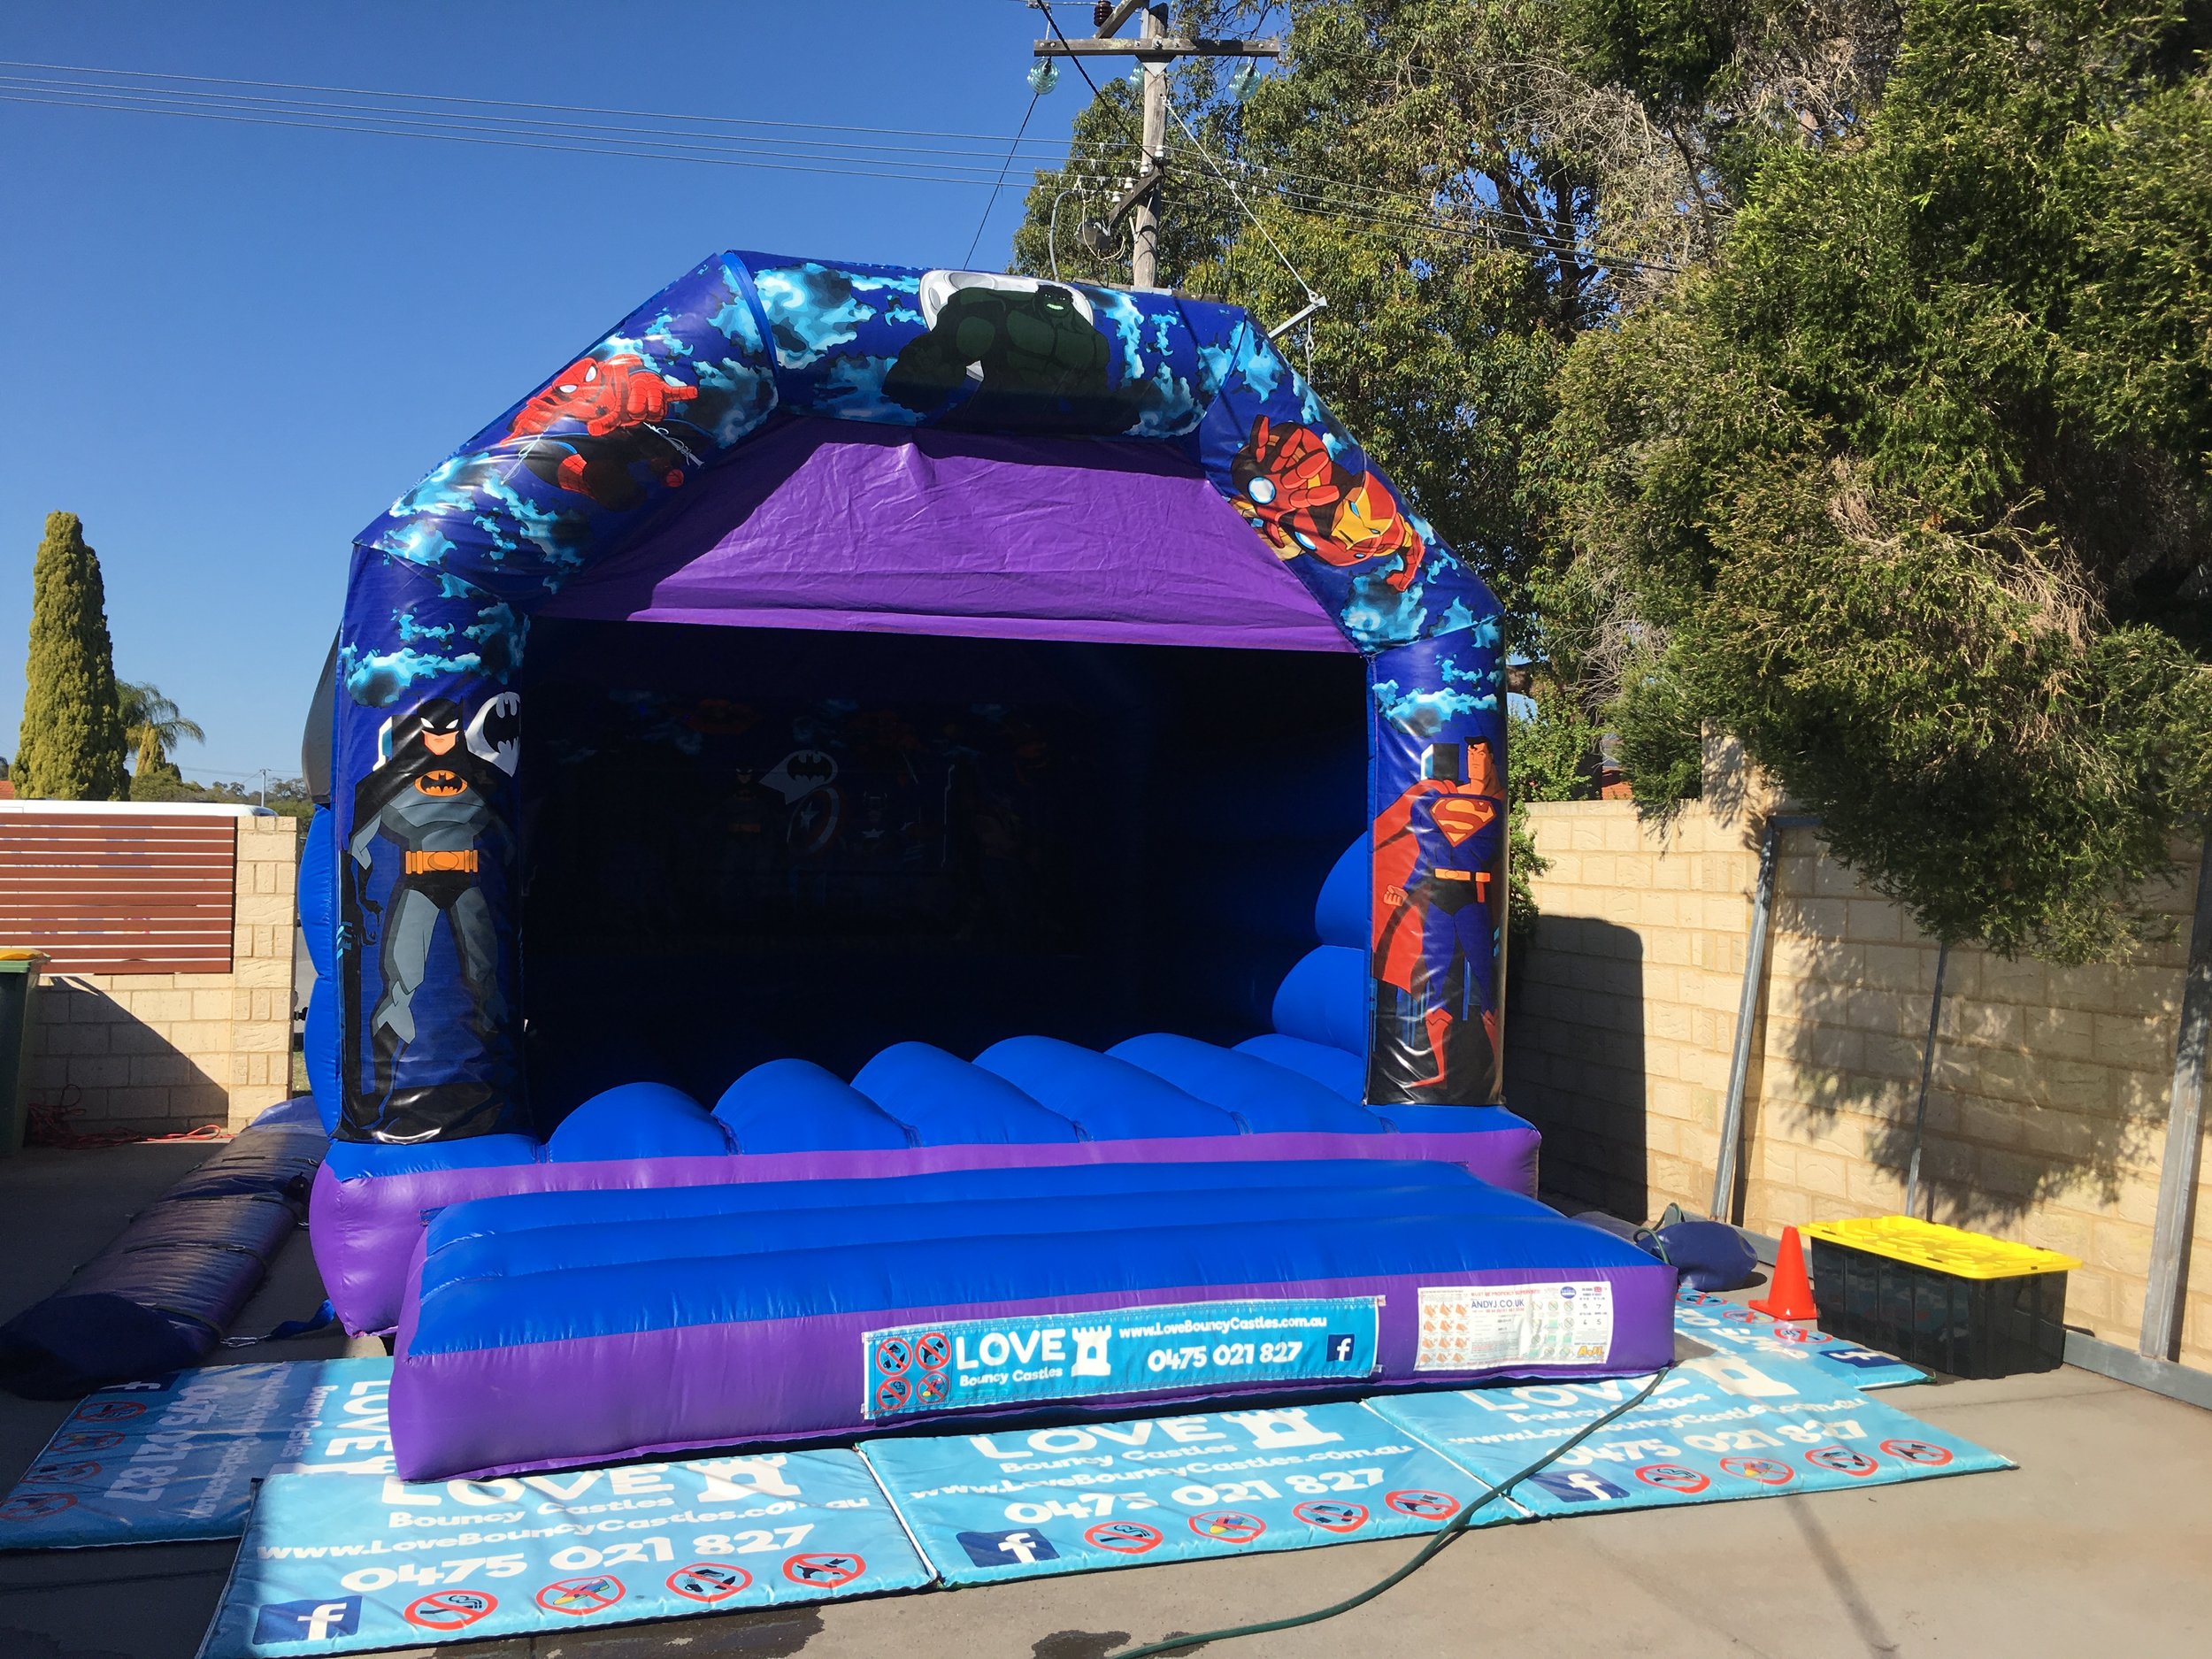 Copy of Large Super Heros Bouncy Castle Hire Perth, WA